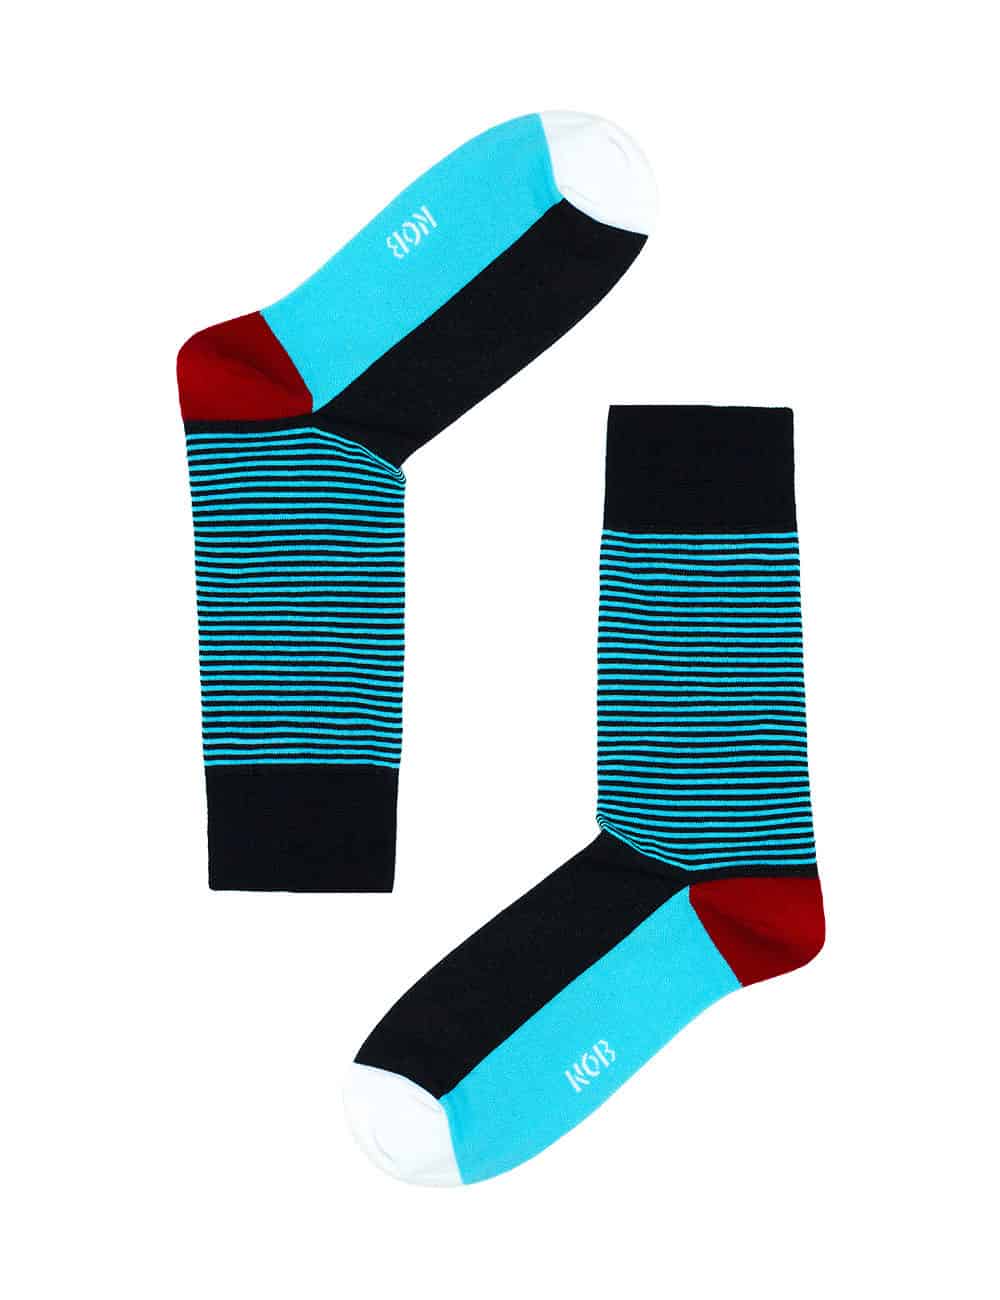 Navy and Turquoise Stripes Crew Socks made with Premium Combed Cotton SOC1B.NOB1